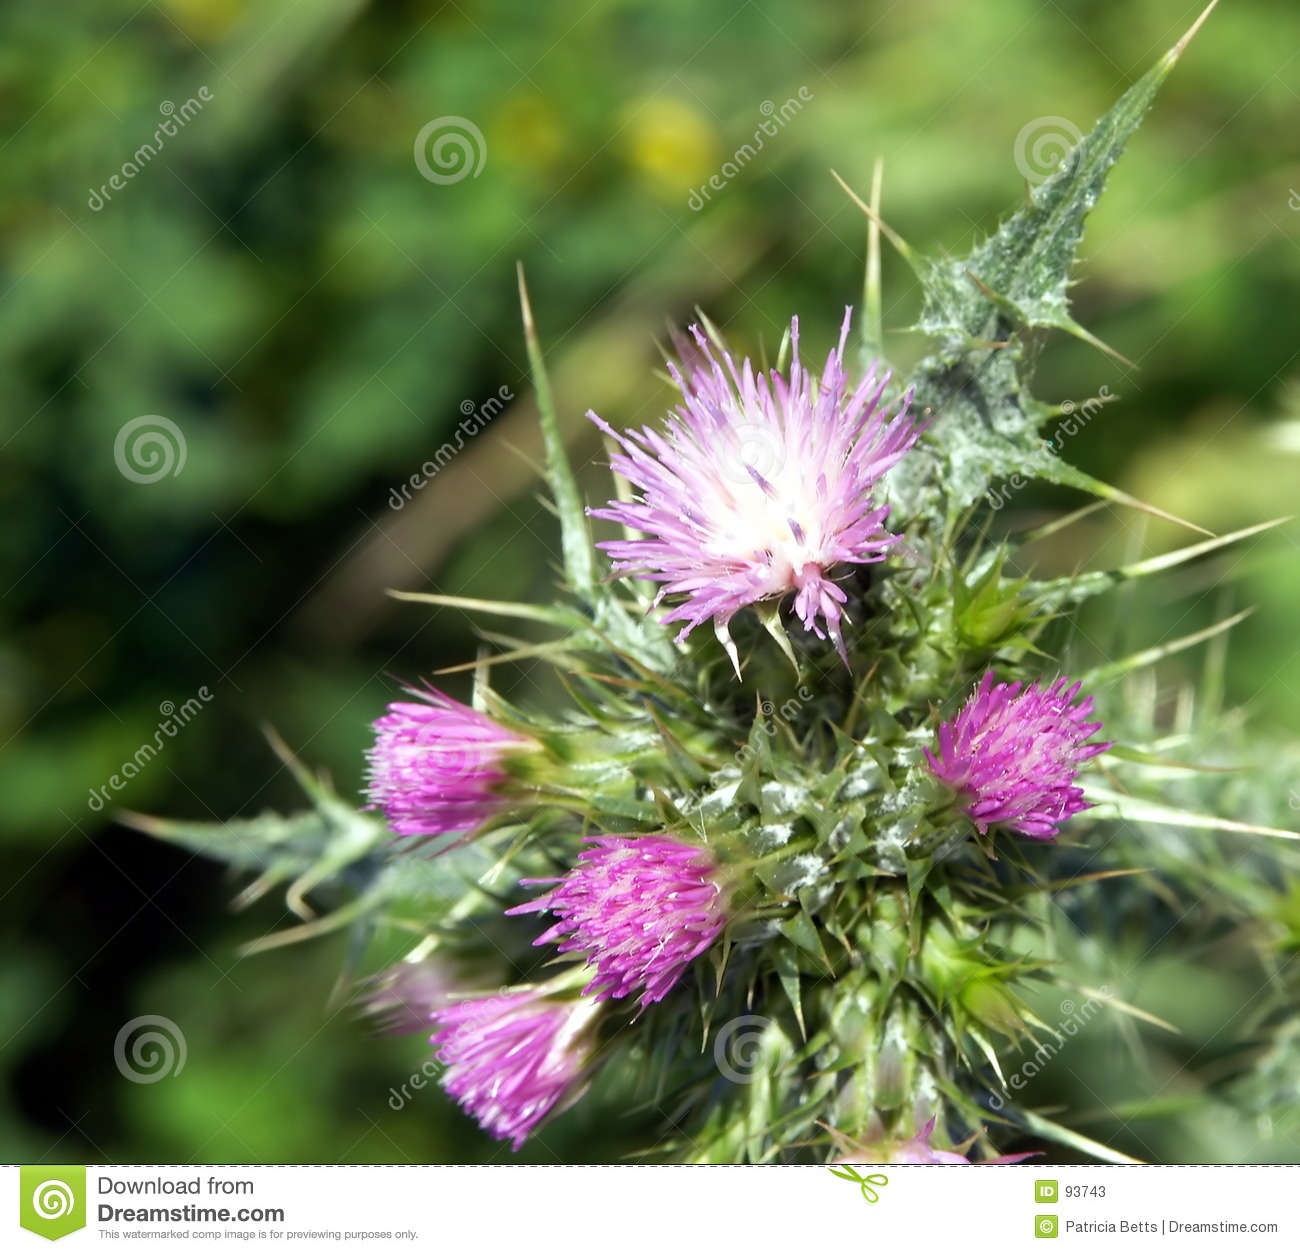 Weed In Full Bloom With Purple Flowers And Thorns